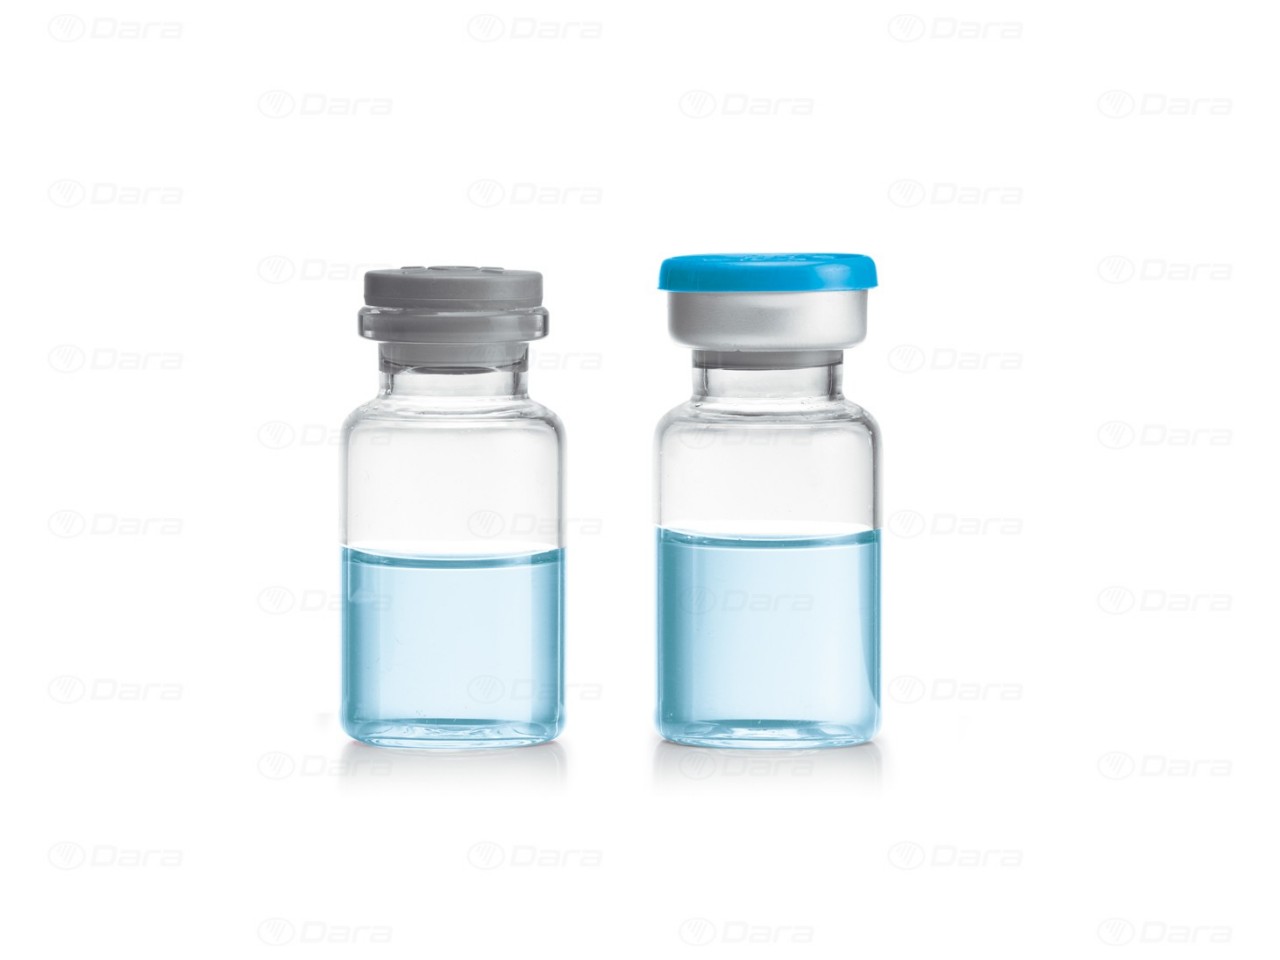 Rotary injectable vial cappers